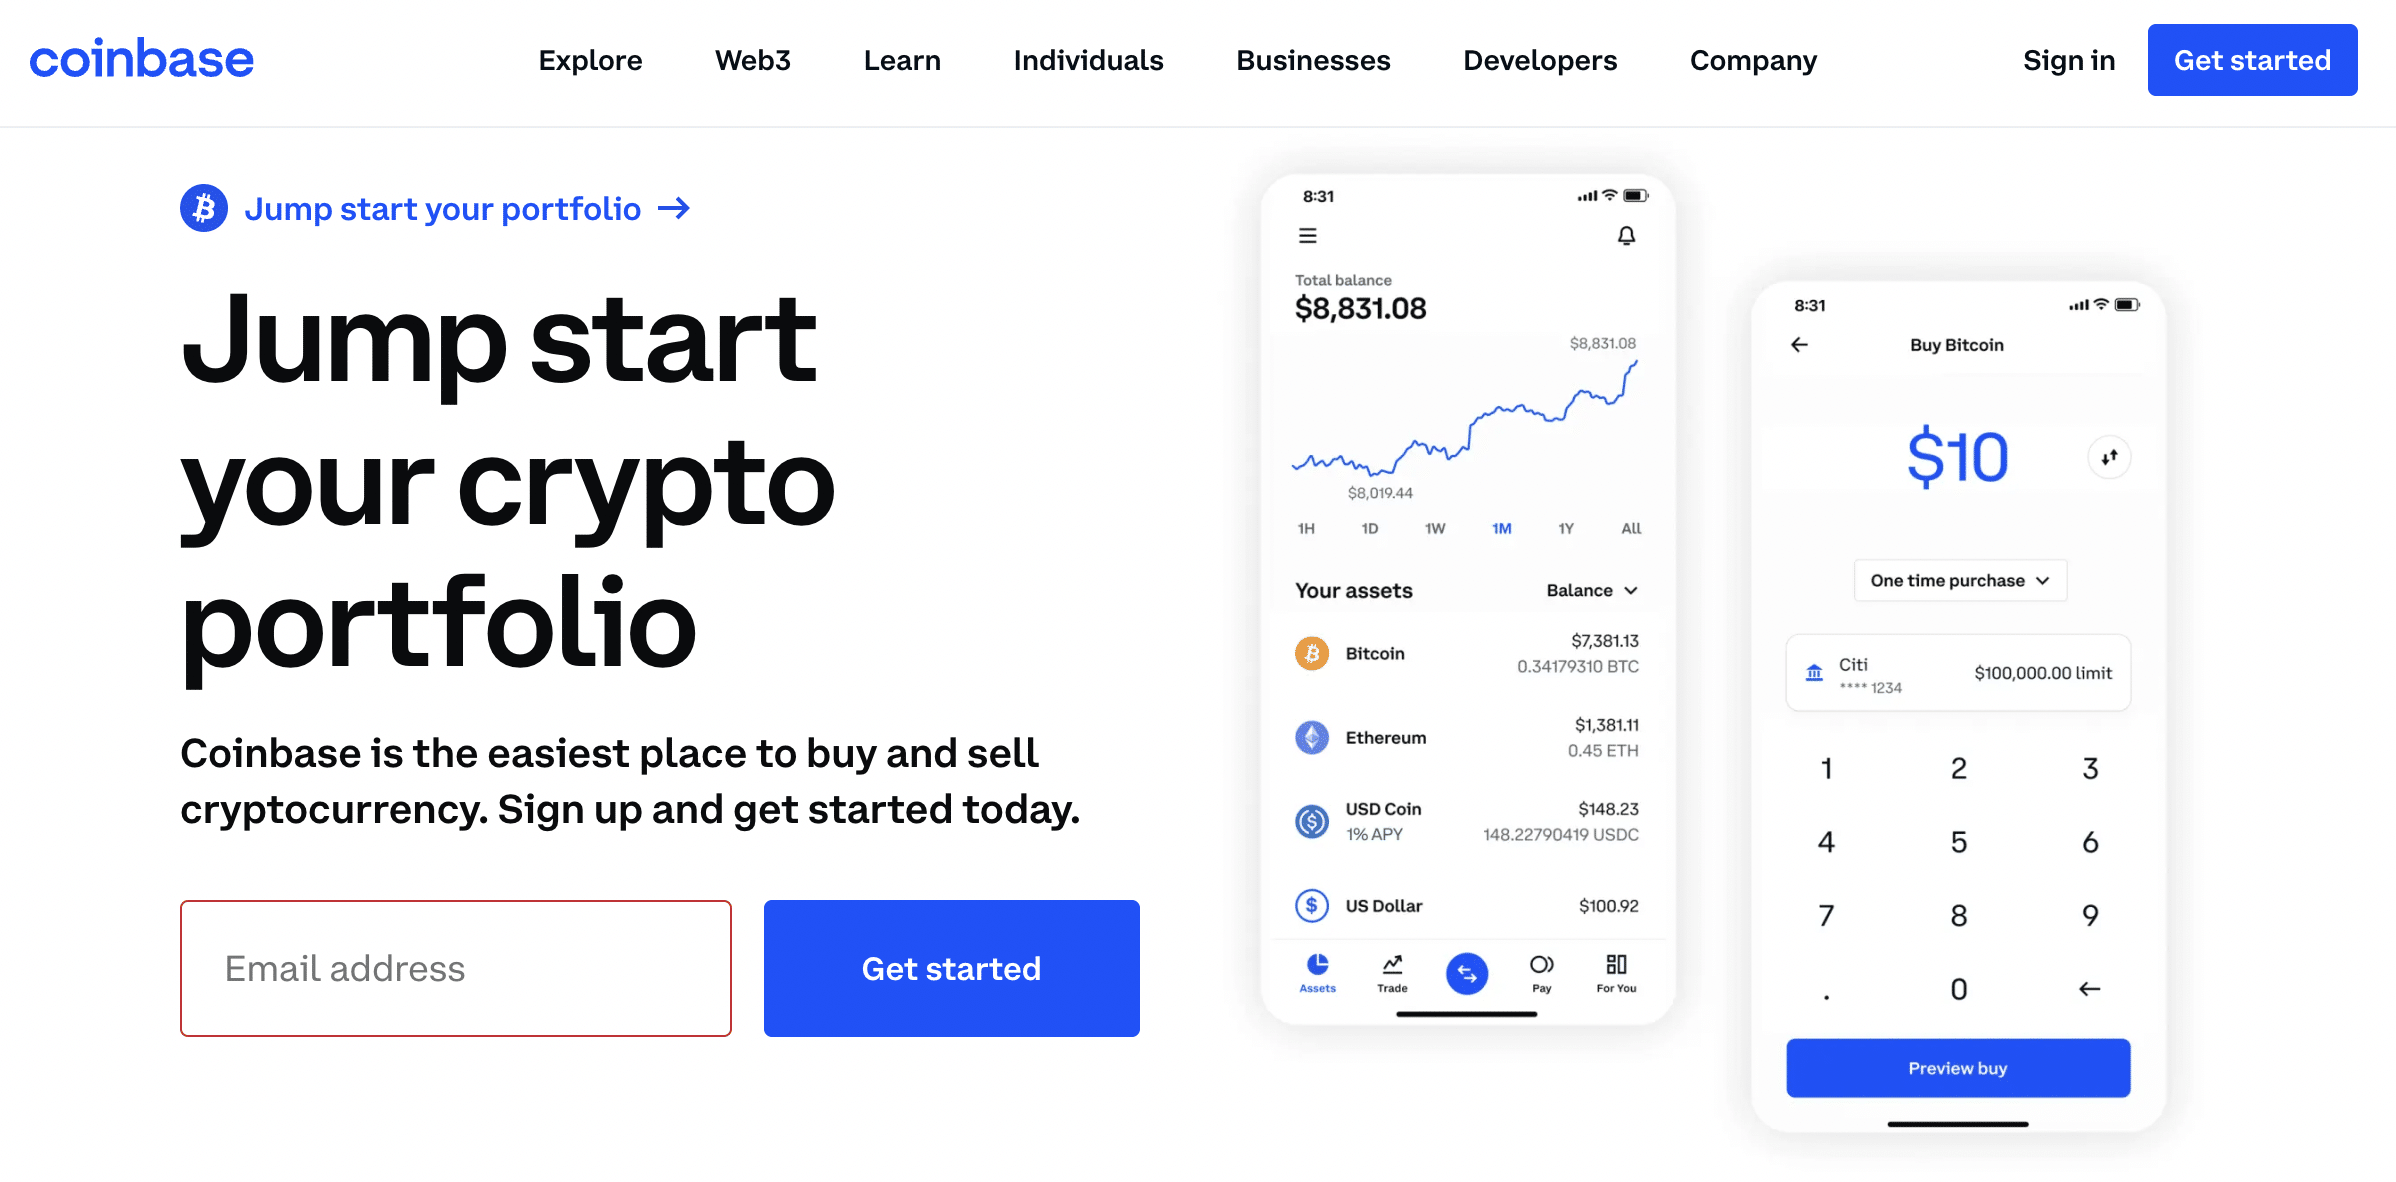 bitcoinhelp.fun – Buy & sell crypto instantly